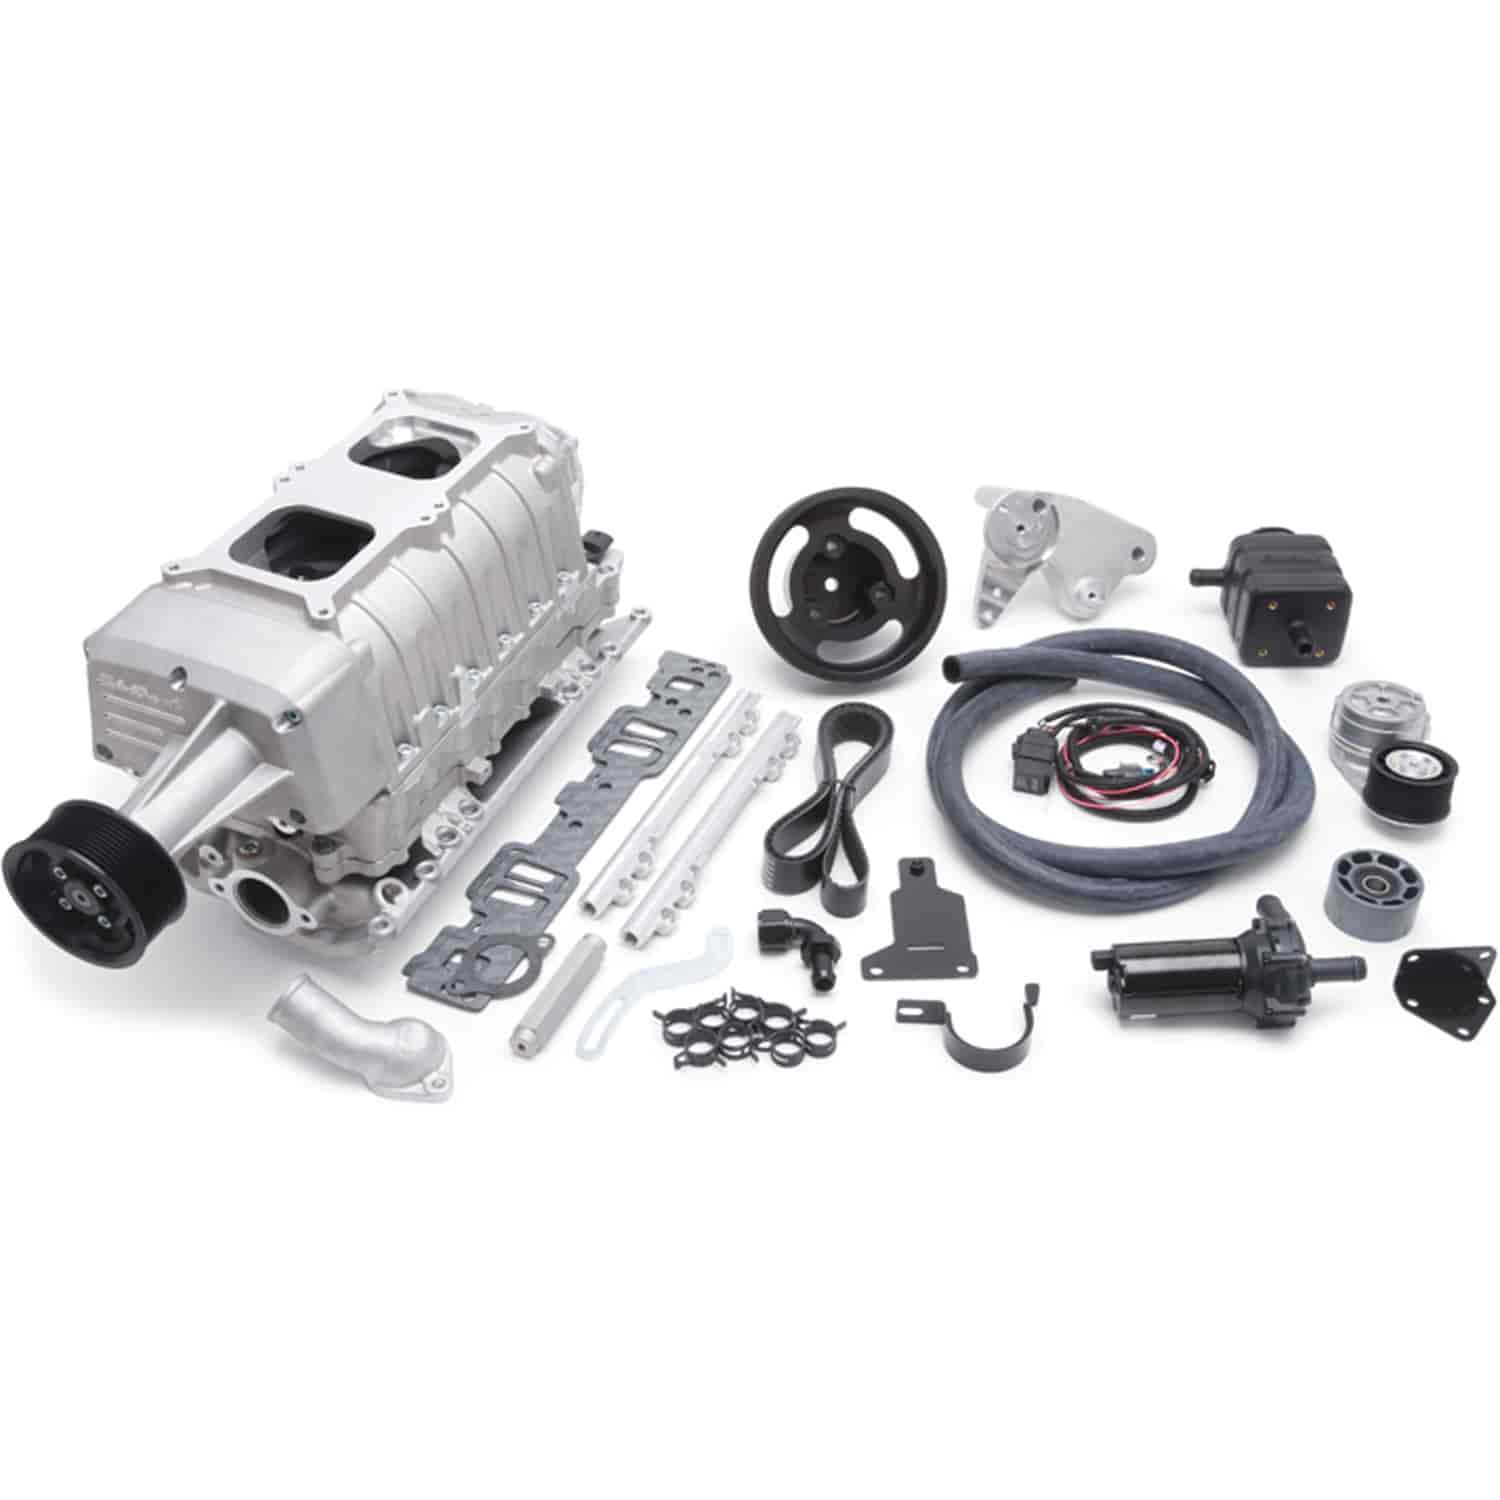 E-Force Enforcer RPM Complete EFI Satin Supercharger Kit for 1955-1986 Small Block Chevy with Vortec Heads